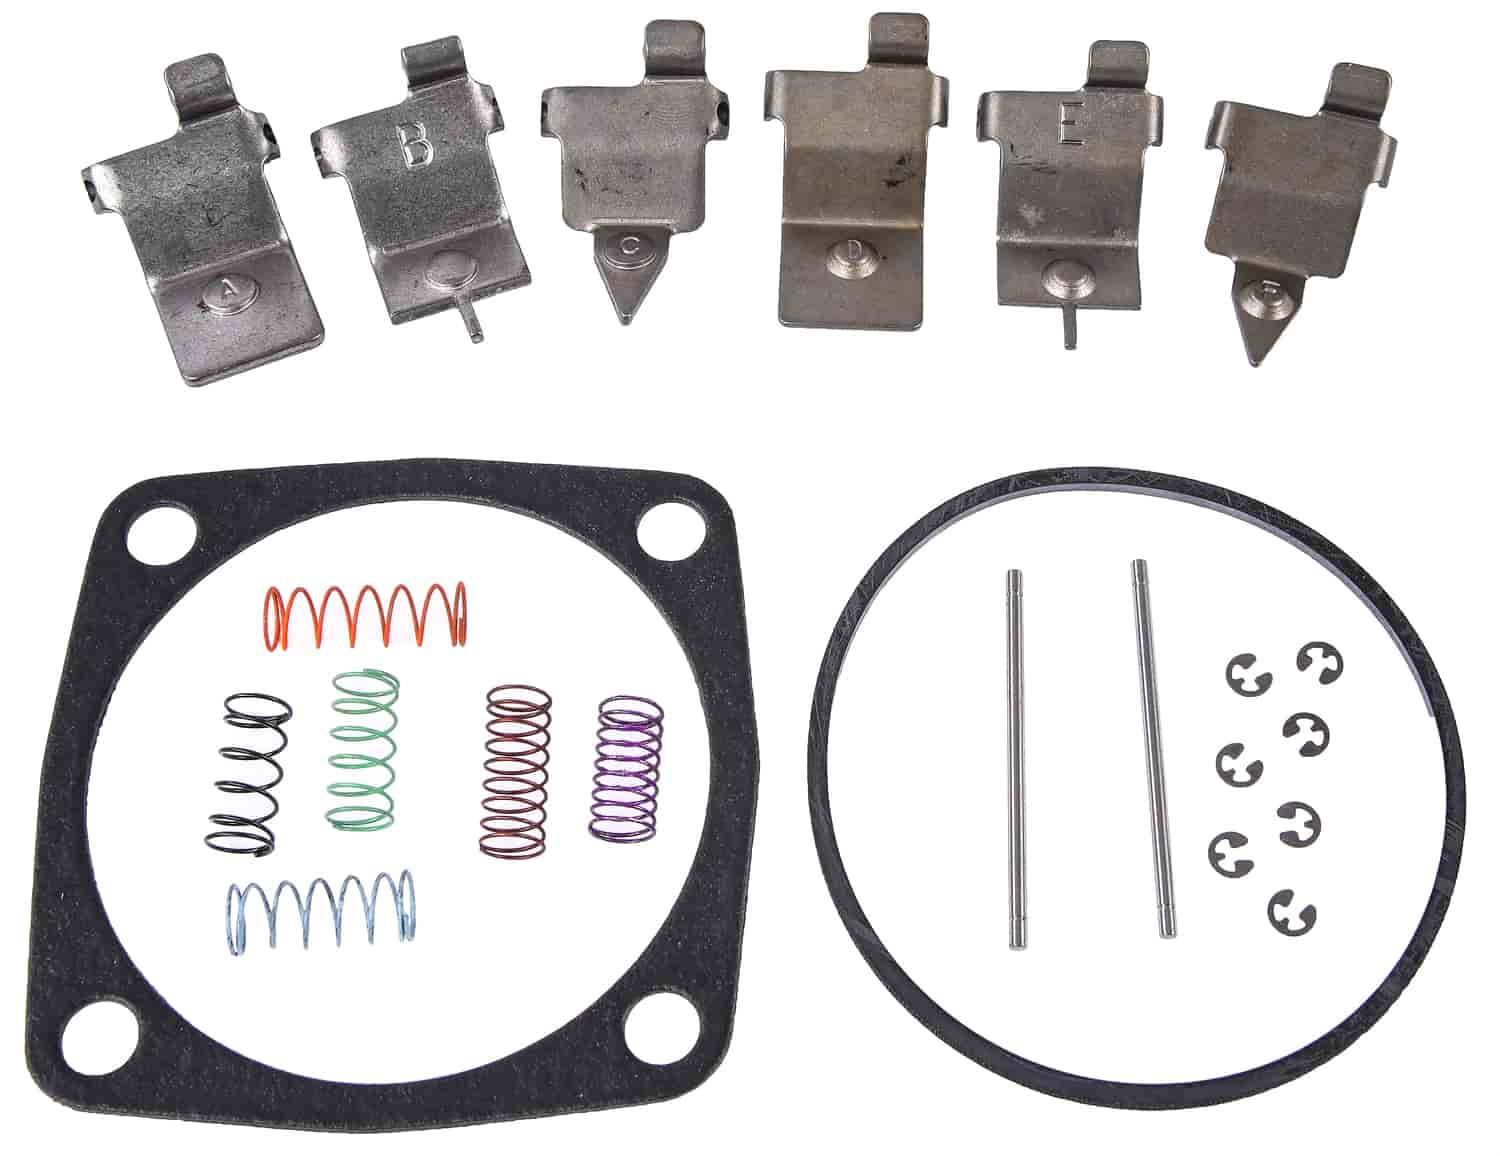 Governor Recalibration Kit for GM TH-250, TH-350, TH-400, 700R4